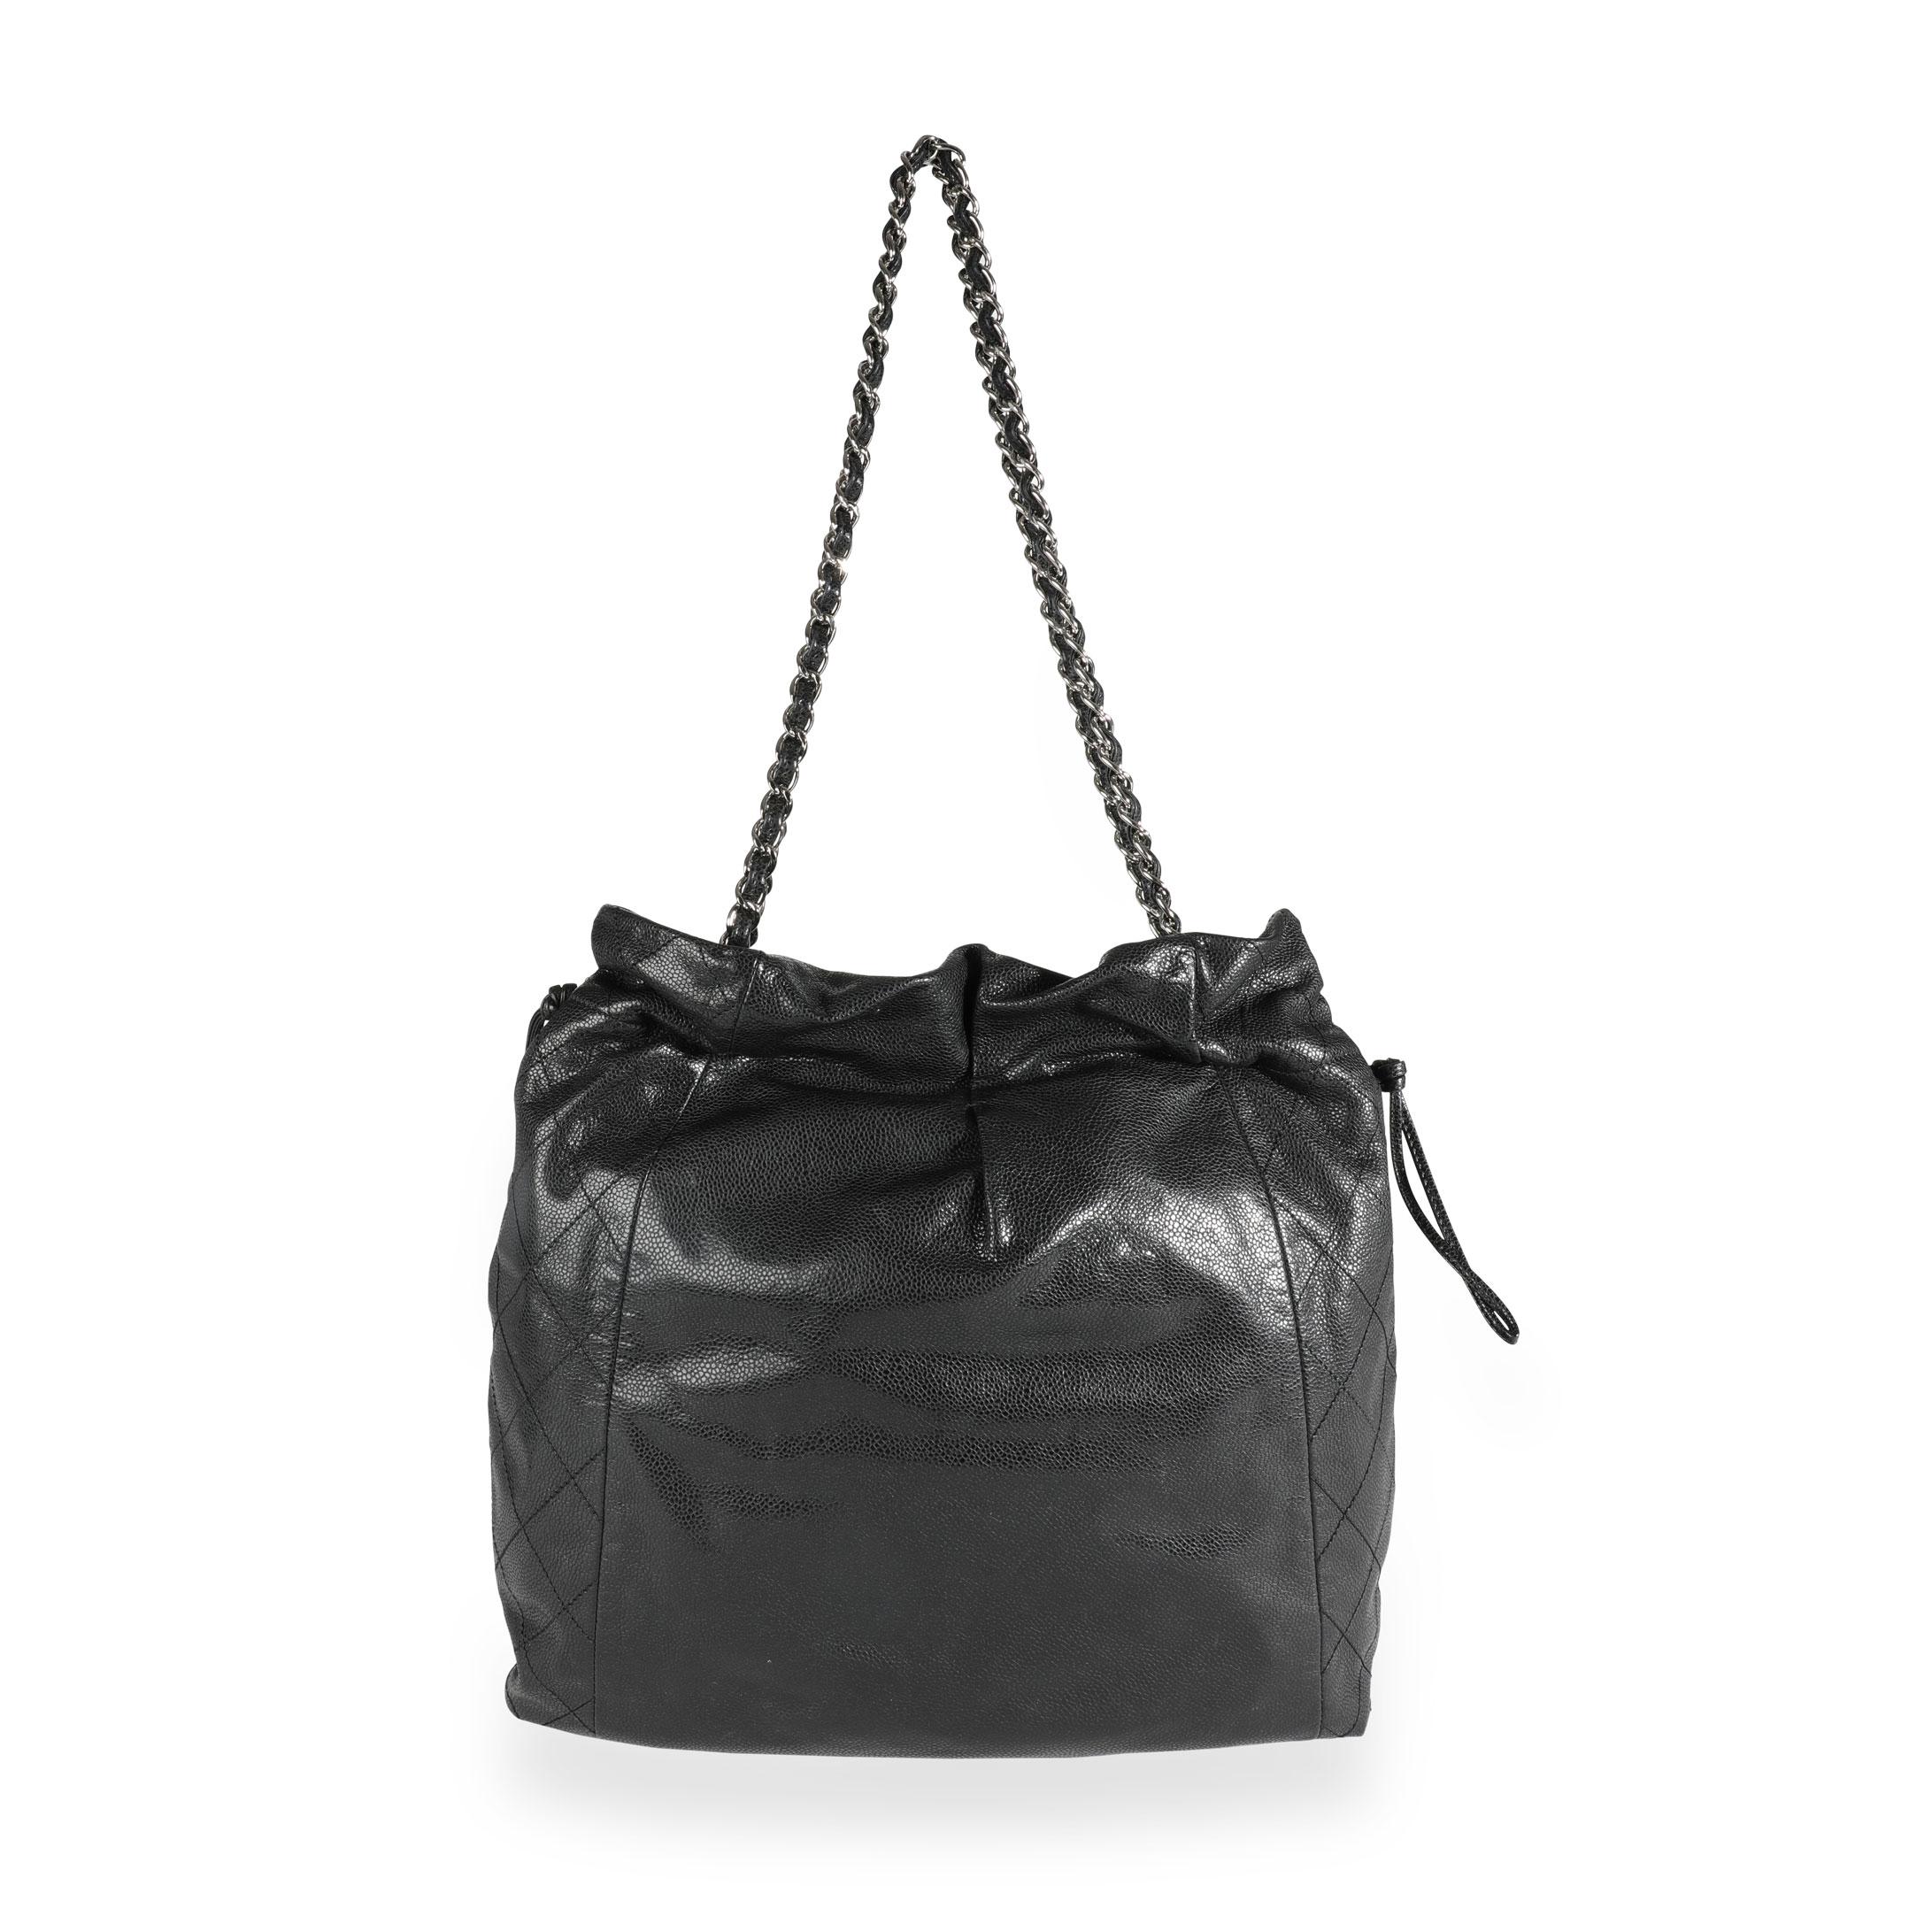 Chanel Black Caviar Leather Timeless Drawstring Tote 1